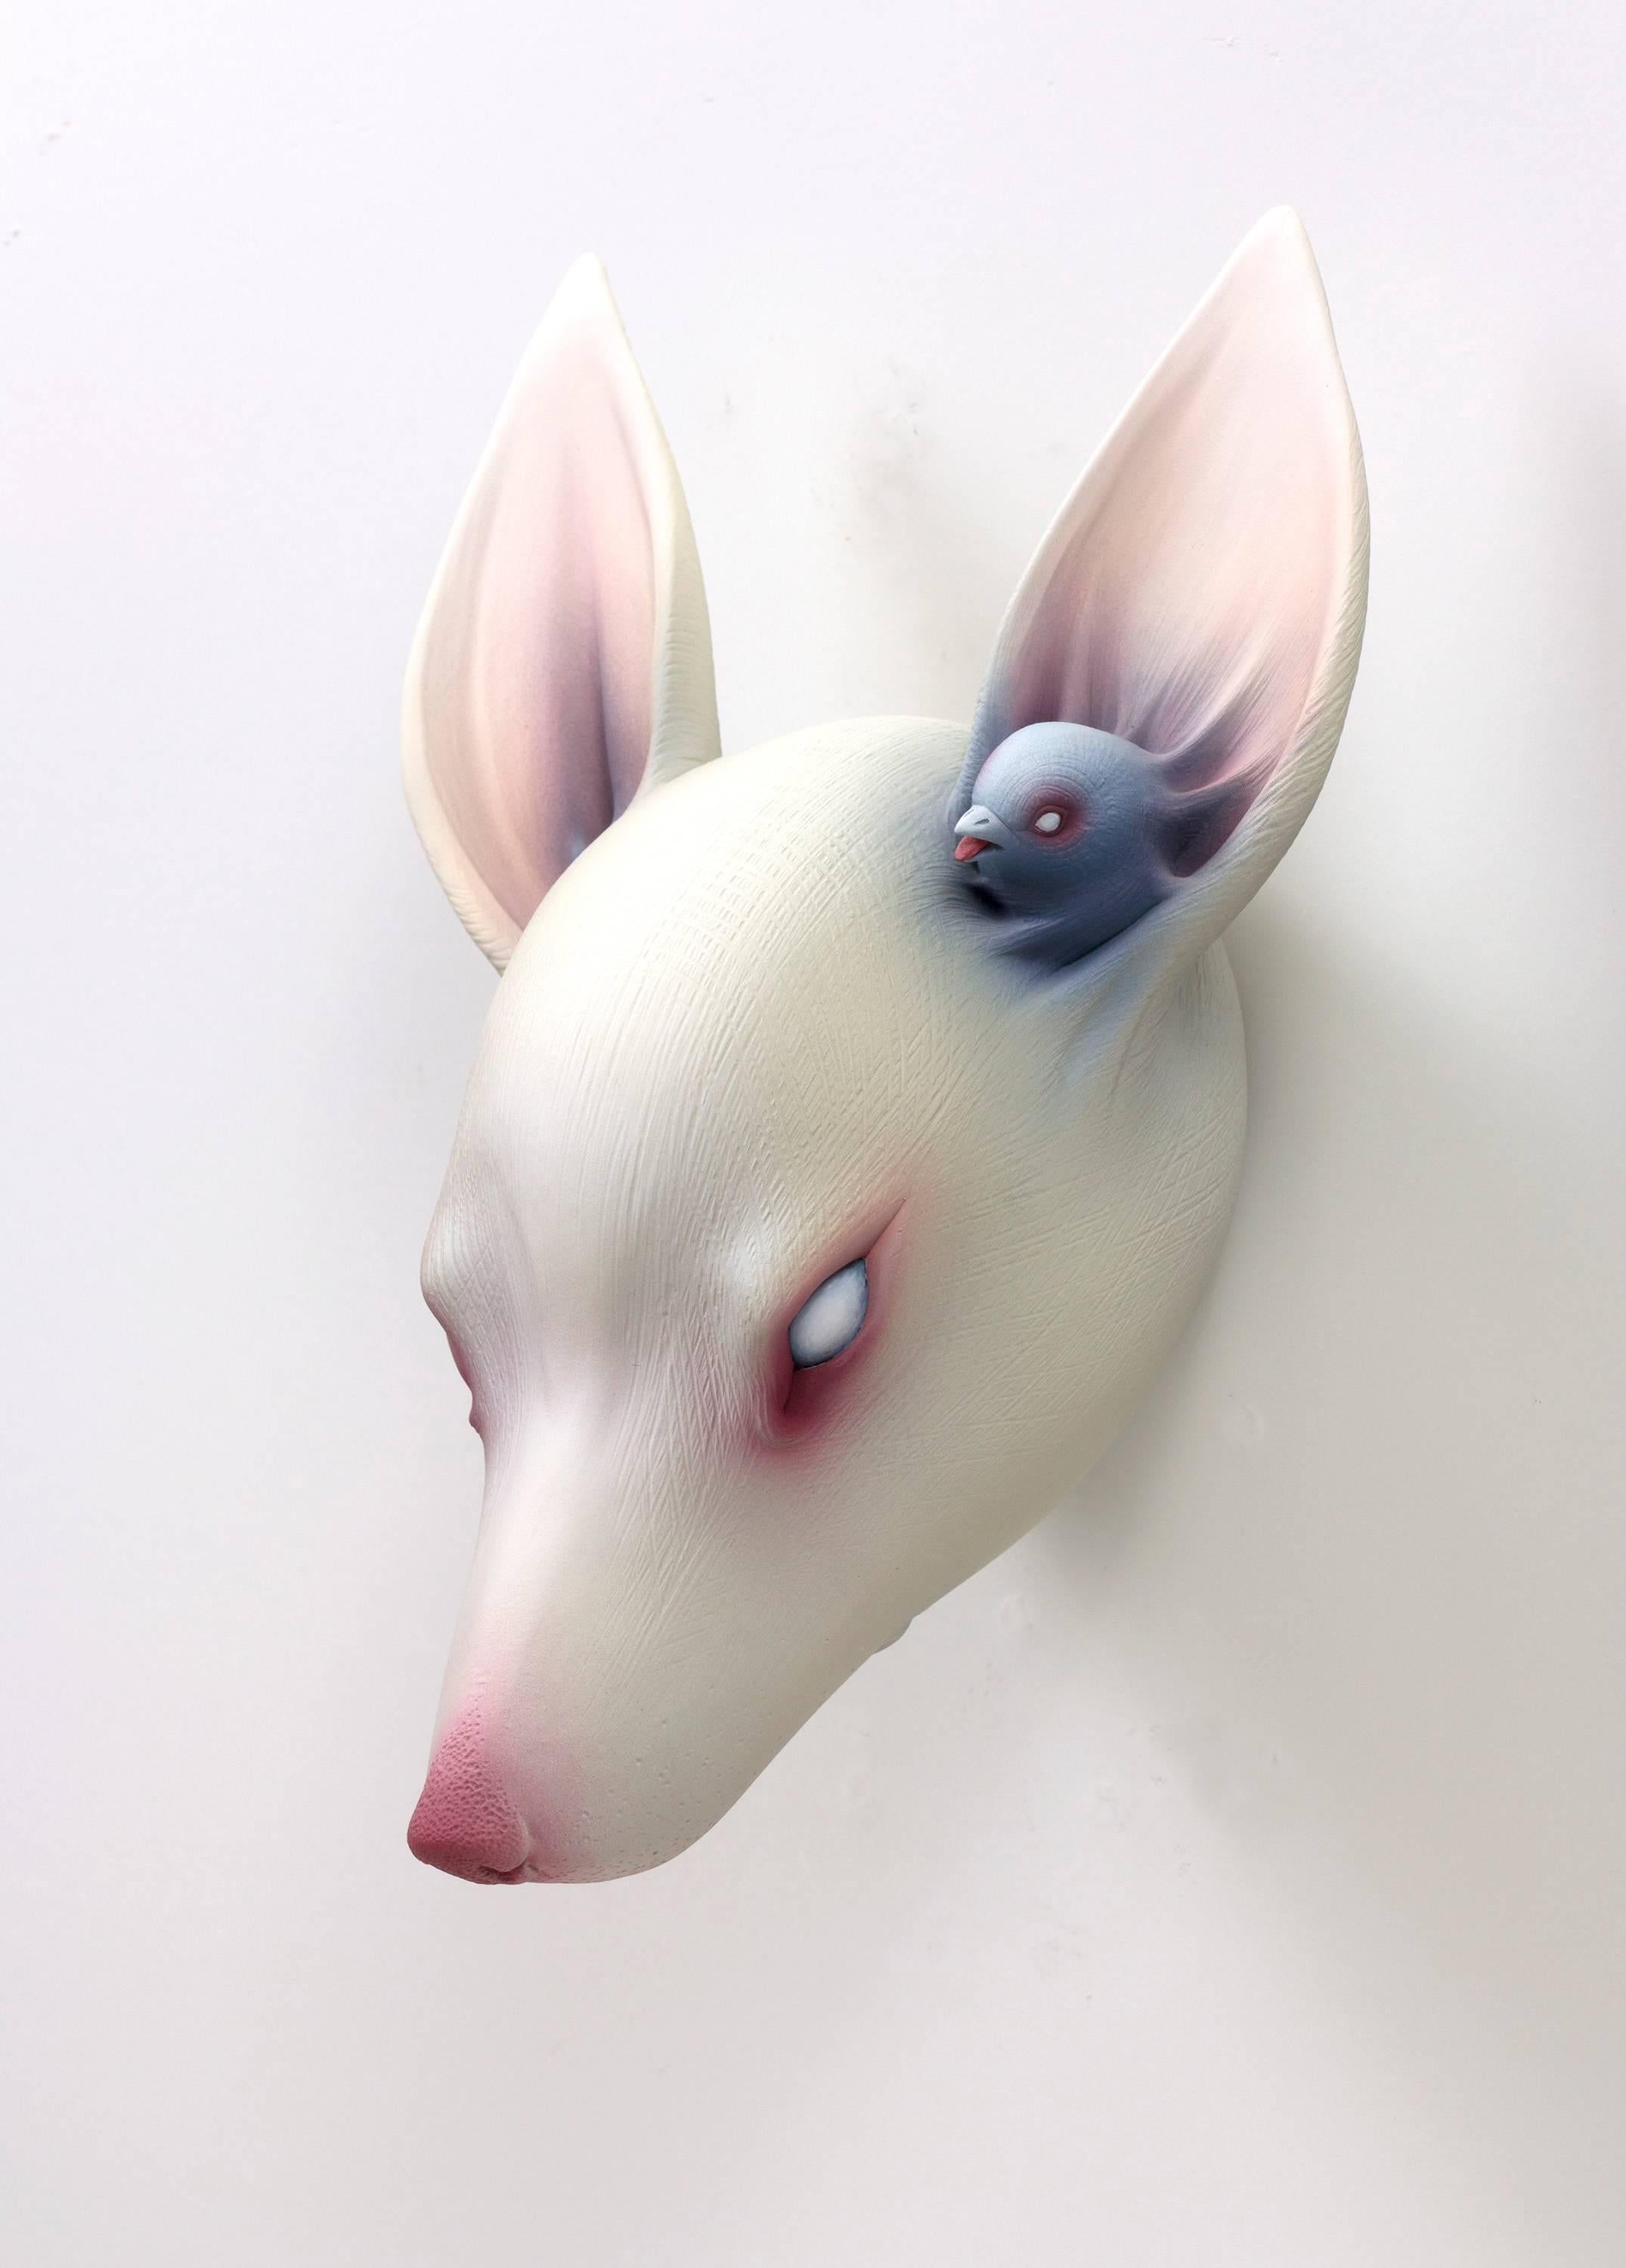 Erika's creations combine the curious, endearing, strange, and surreal all into one wonderful, life-like package.  

In My Ear is a wall mounted sculpture piece, measuring at 10" x 9.5" x 6"
Created 2016